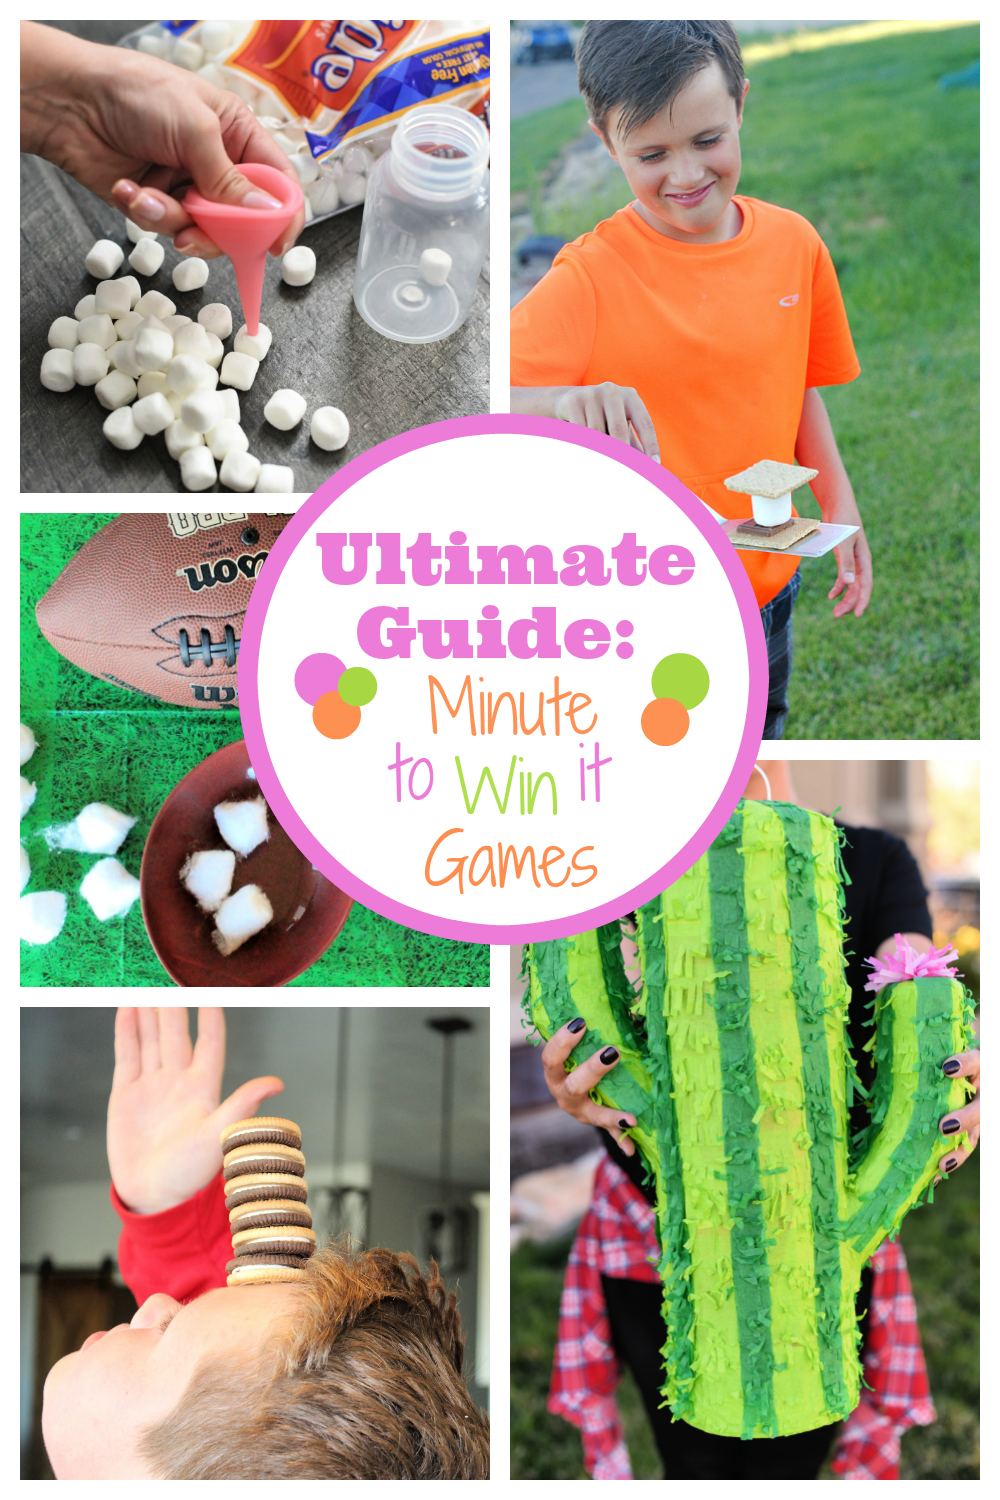 Fun Minute to Win it Games-Minute to win it game ideas for all ages, all holidays and any occasion you're looking for! Perfect party games for any occasion! #minutetowinit #partygames #partyideas #games #gamesforkids